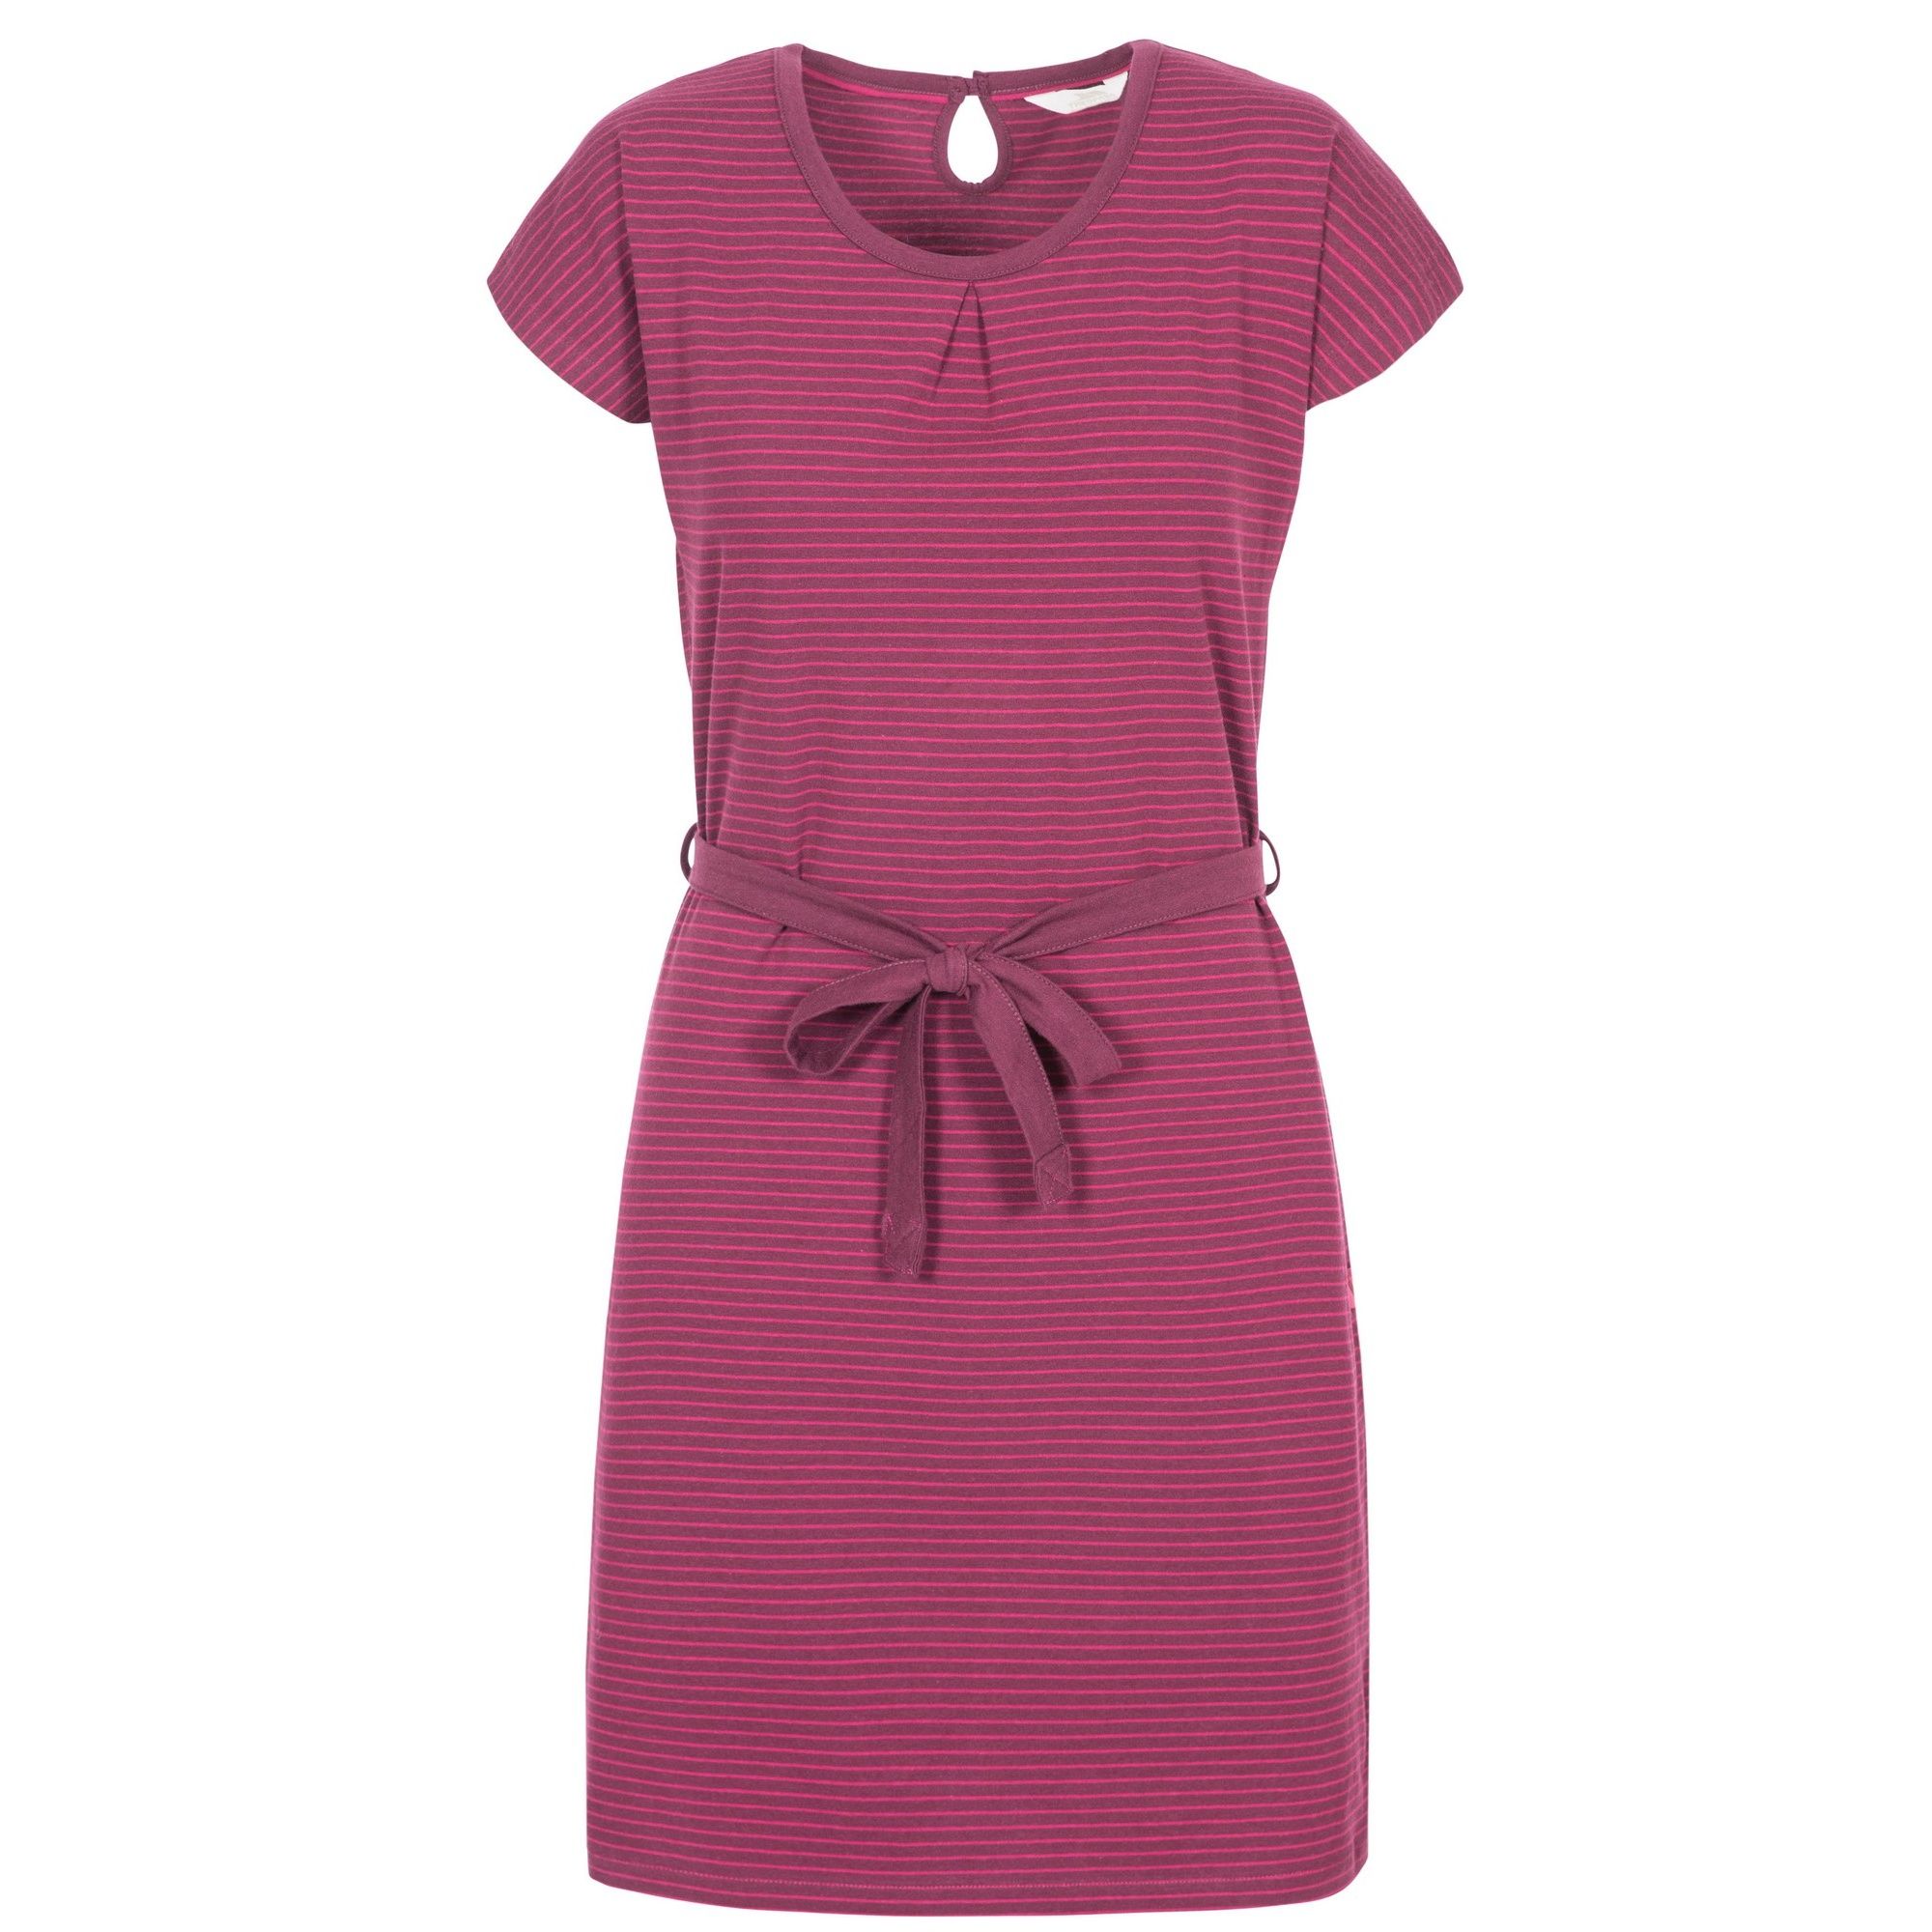 Casual and cool, this comfortable yarn dyed stripe dress is perfect for spring and summer. Features cap sleeves with soft front pleat at the neckline, tie belt at the waist and two hand pockets. Keyhole button fastening at the back. Woven look. 95% Cotton, 5% Elastane.